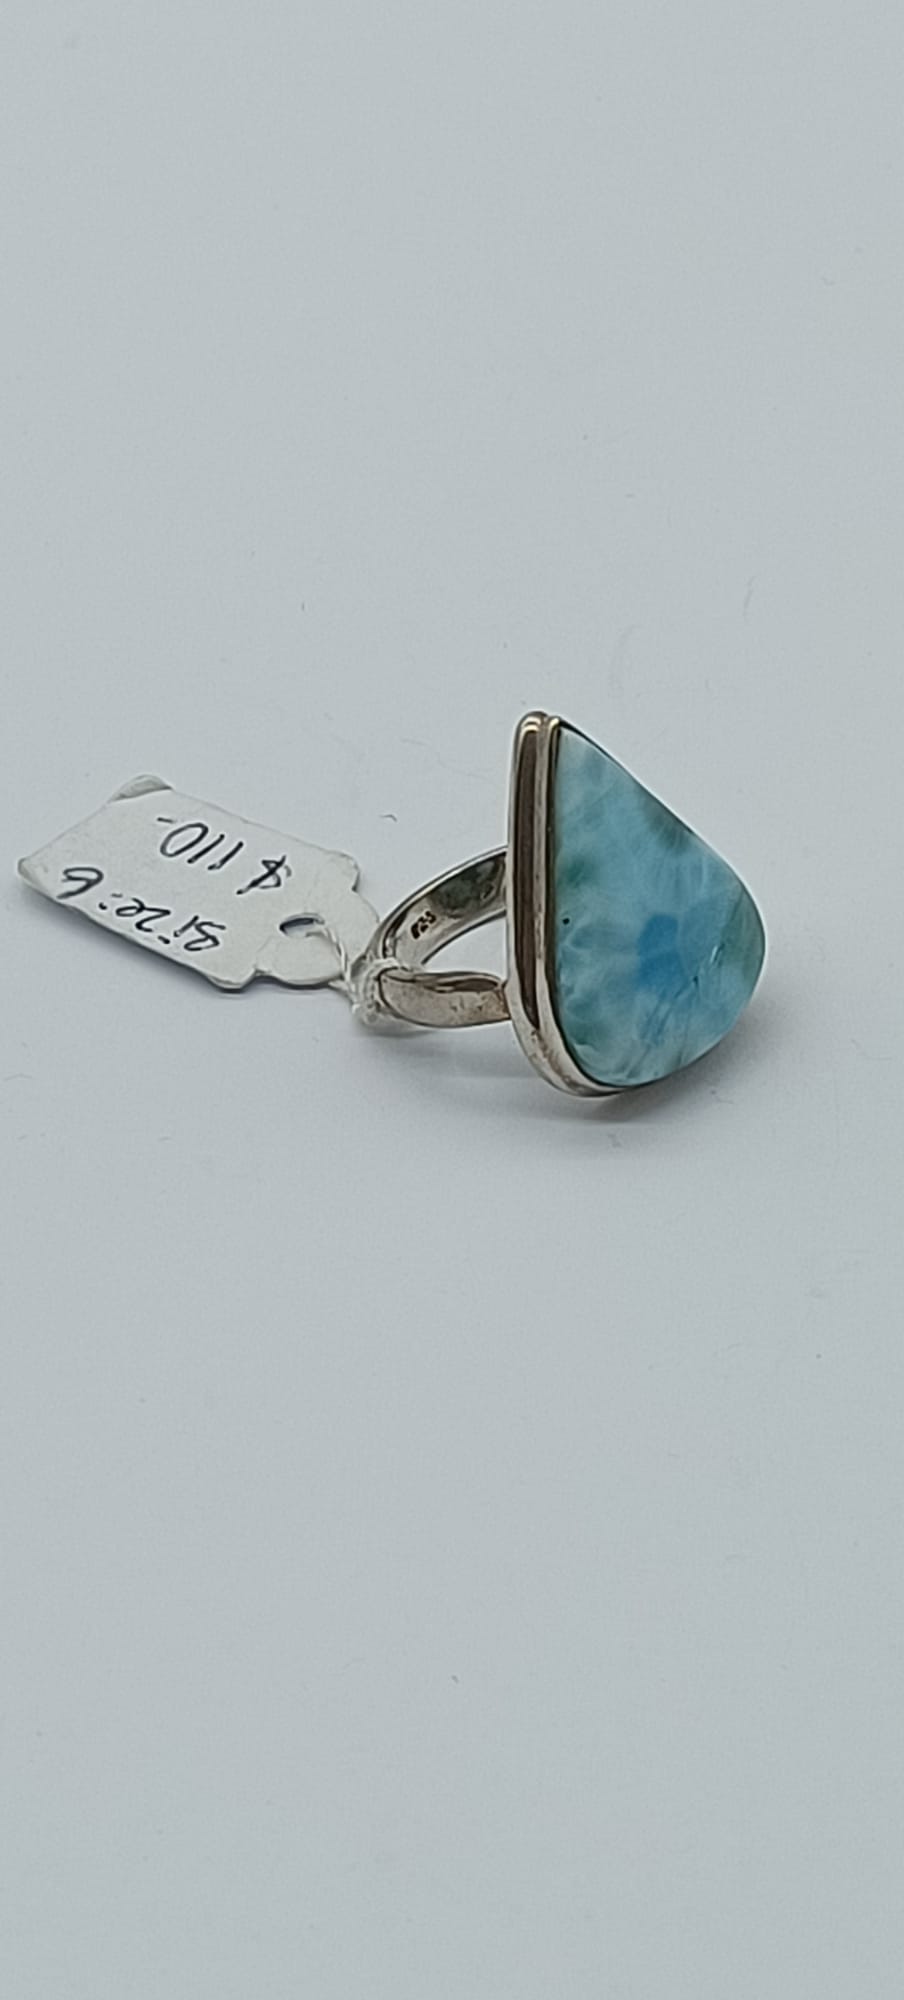 Larimar 925 Sterling Silver Ring Size 6